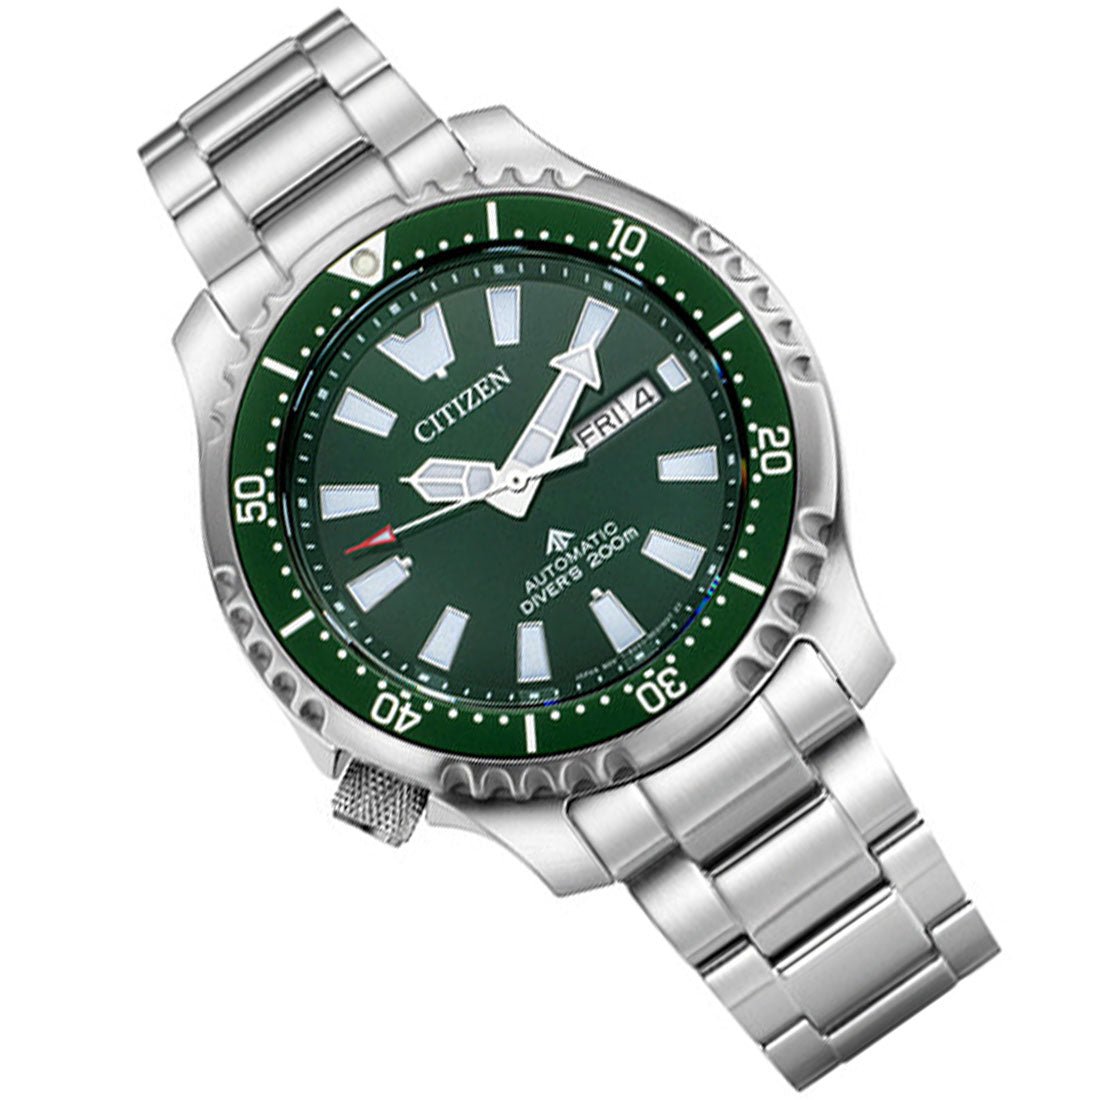 Citizen Promaster Marine Fugu NY0131-81X Green Dial Diving Watch with Tank Box -Citizen